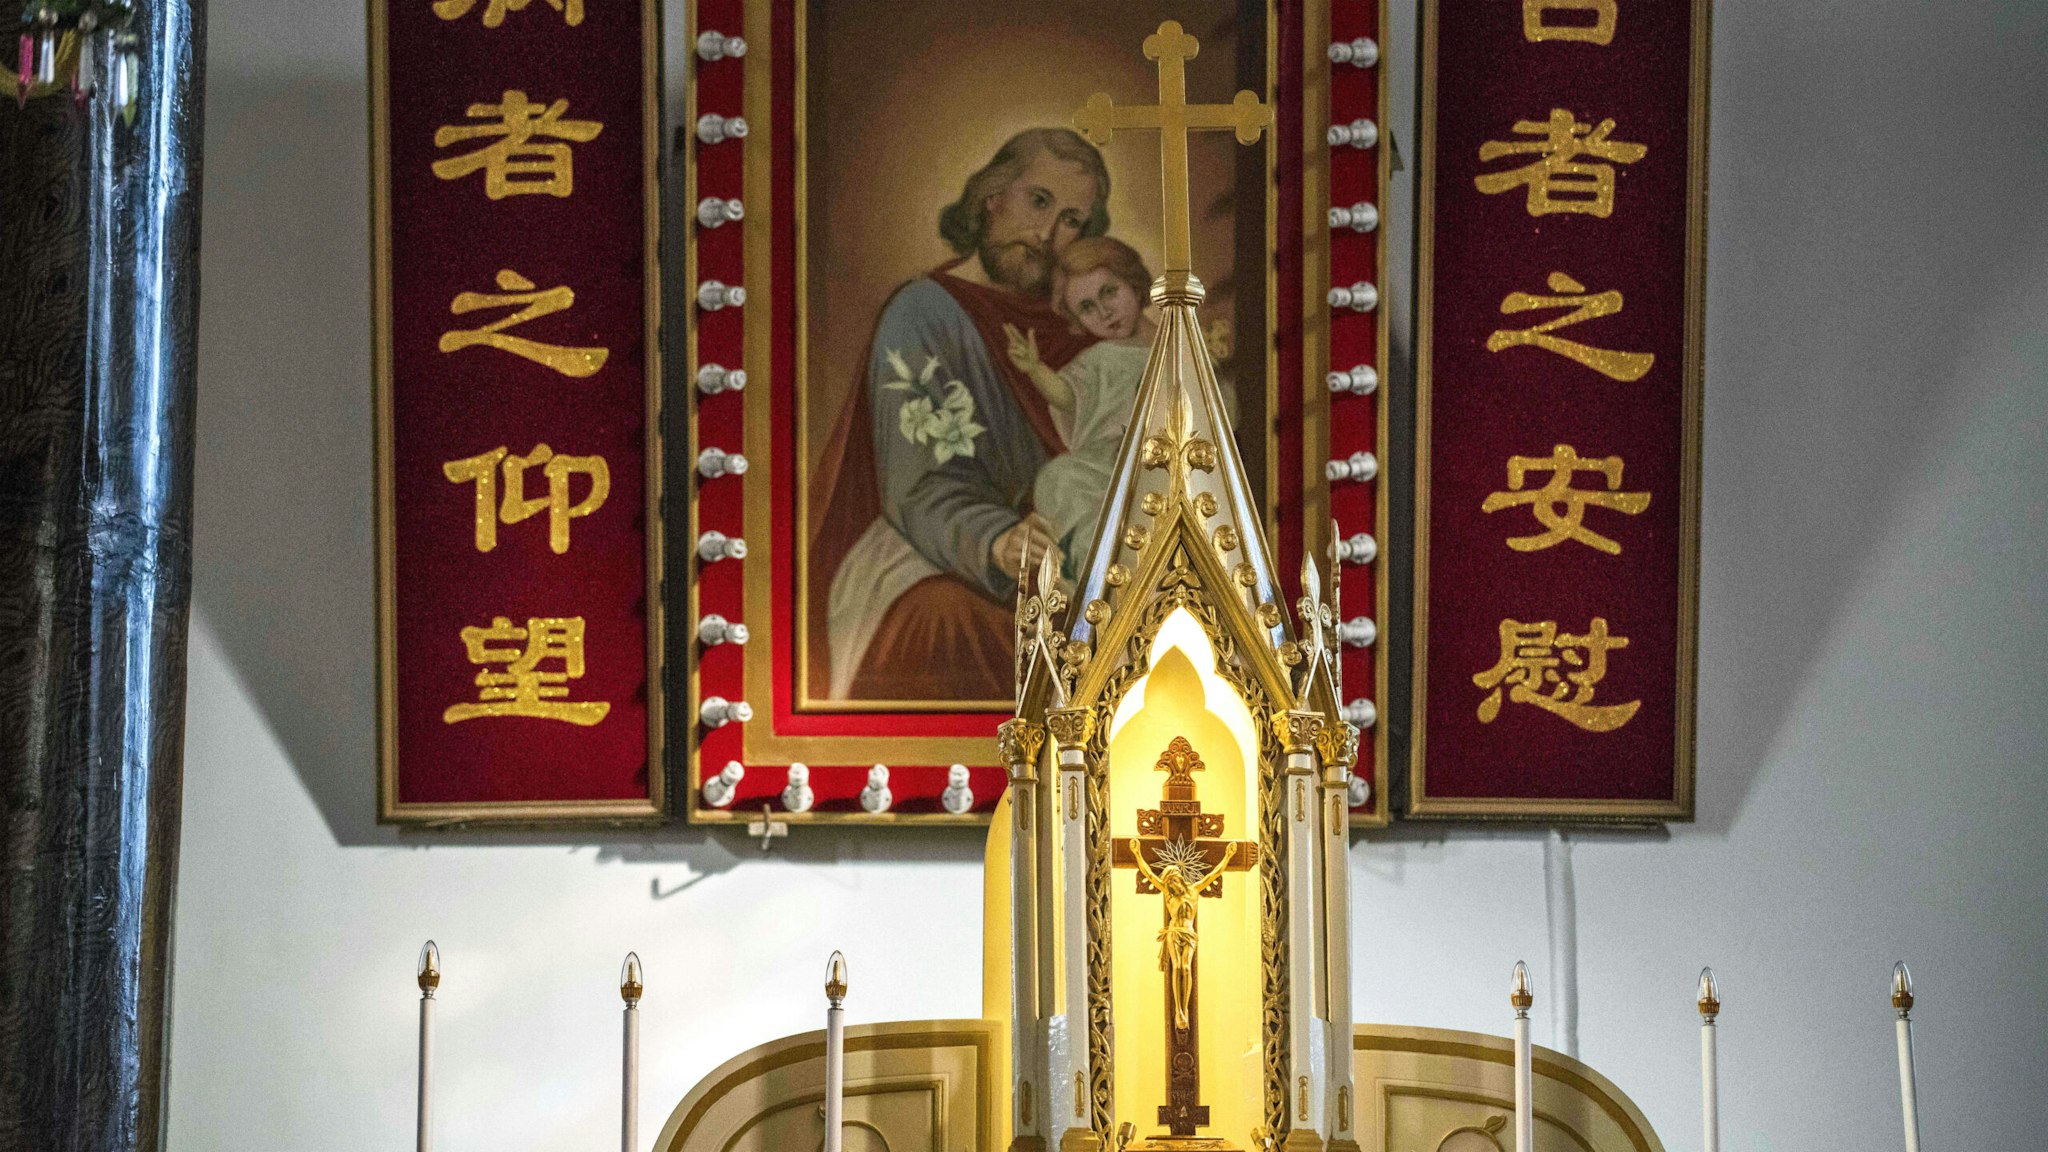 A cross with Jesus (front) and a painting with Joseph and Jesus (back) are seen inside St. Joseph's church, also known as Wangfujing church, in Beijing on January 25, 2018.